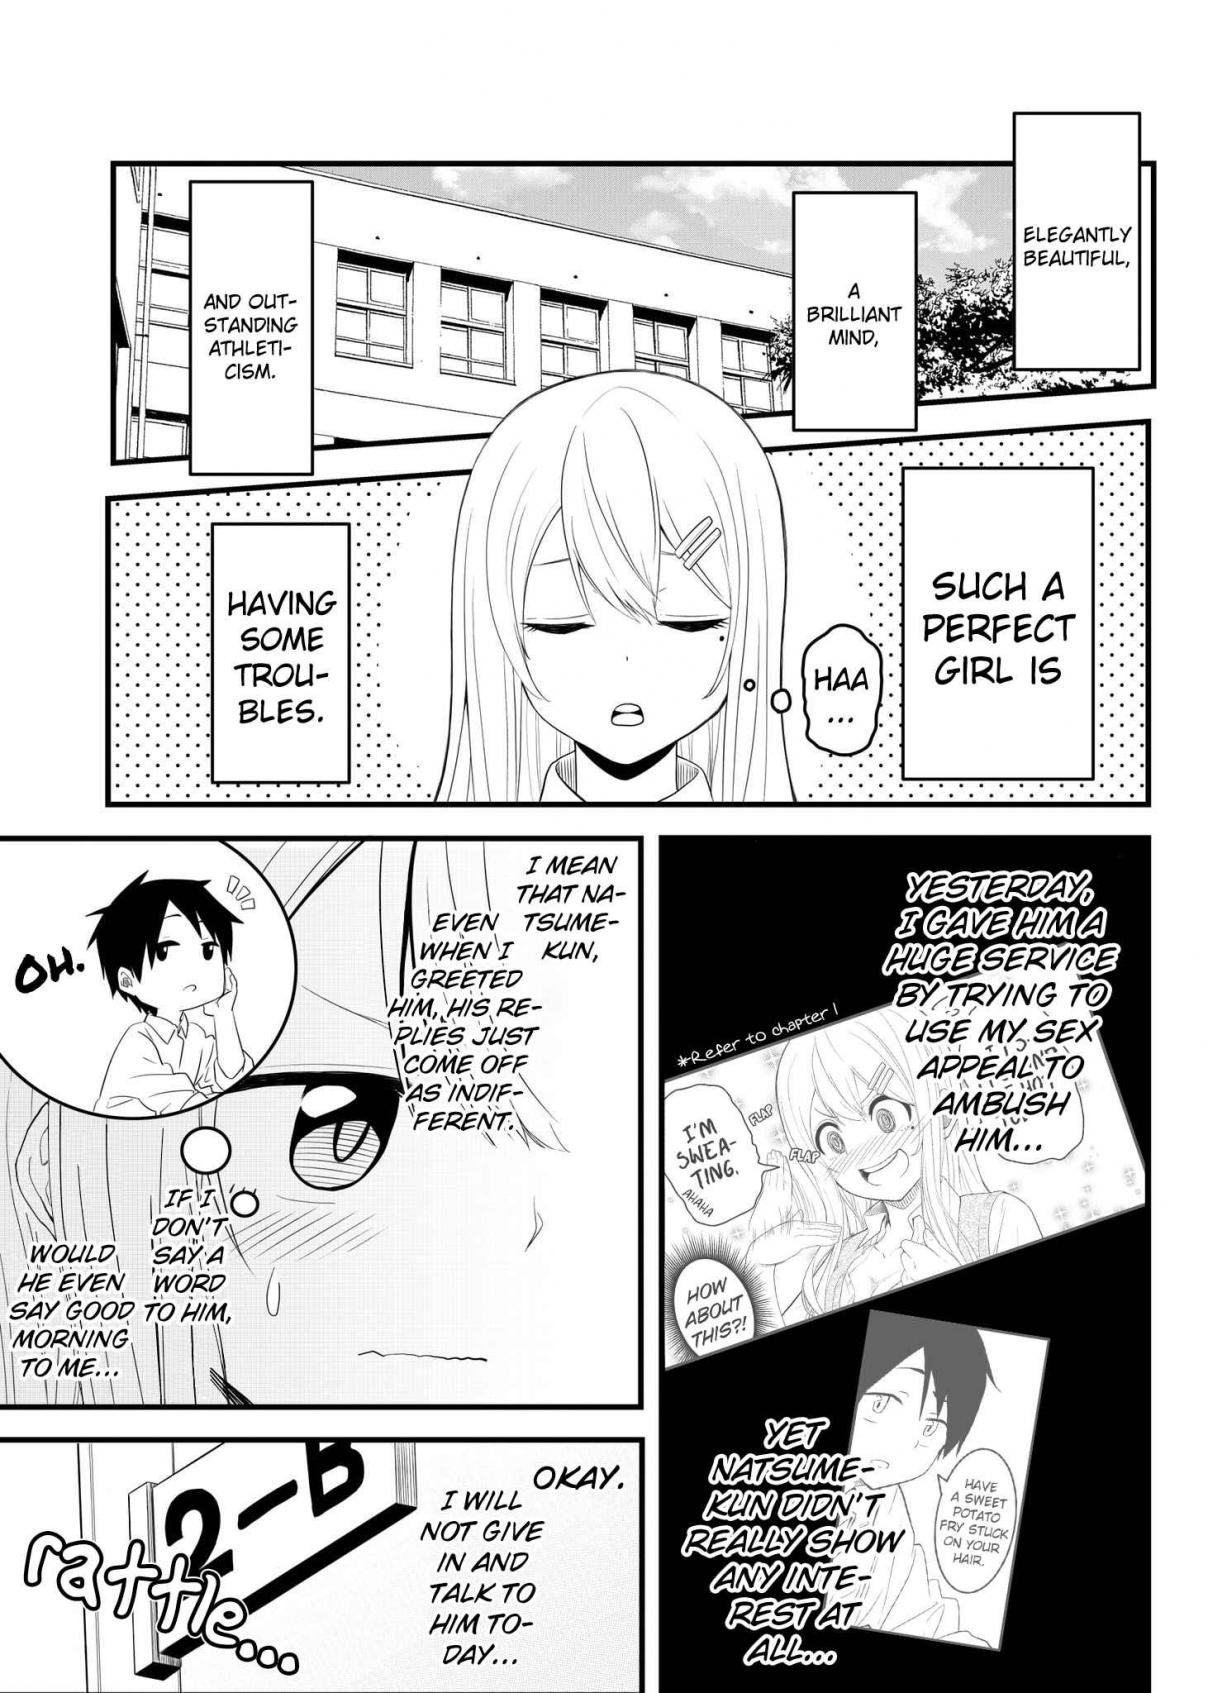 A Story About a Perfect Girl Gradually Breaking Down Ch. 2